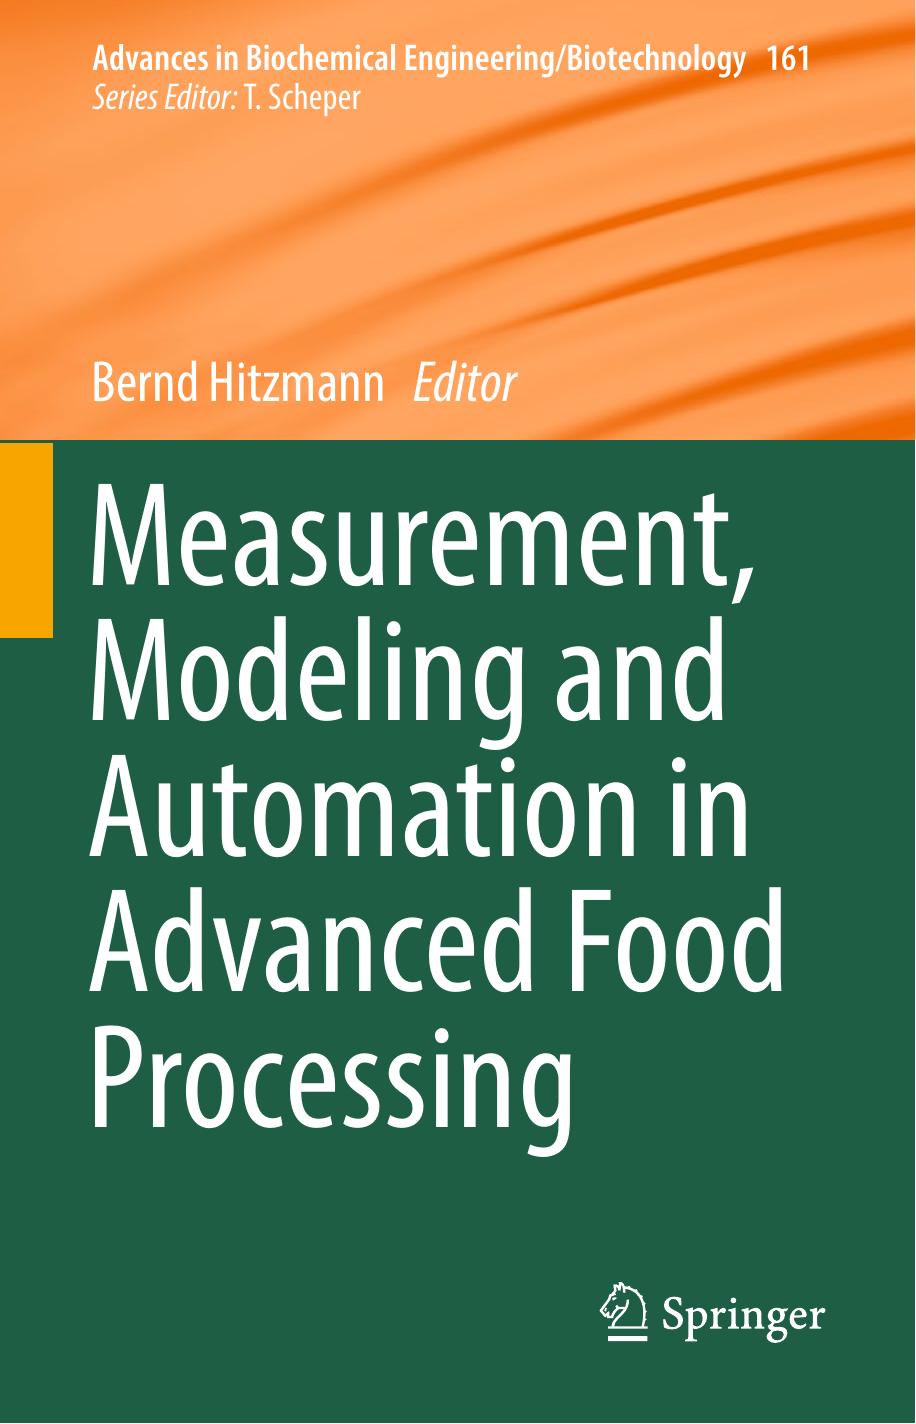 Measurement, modeling and automation in advanced food processing-Springer (2017)